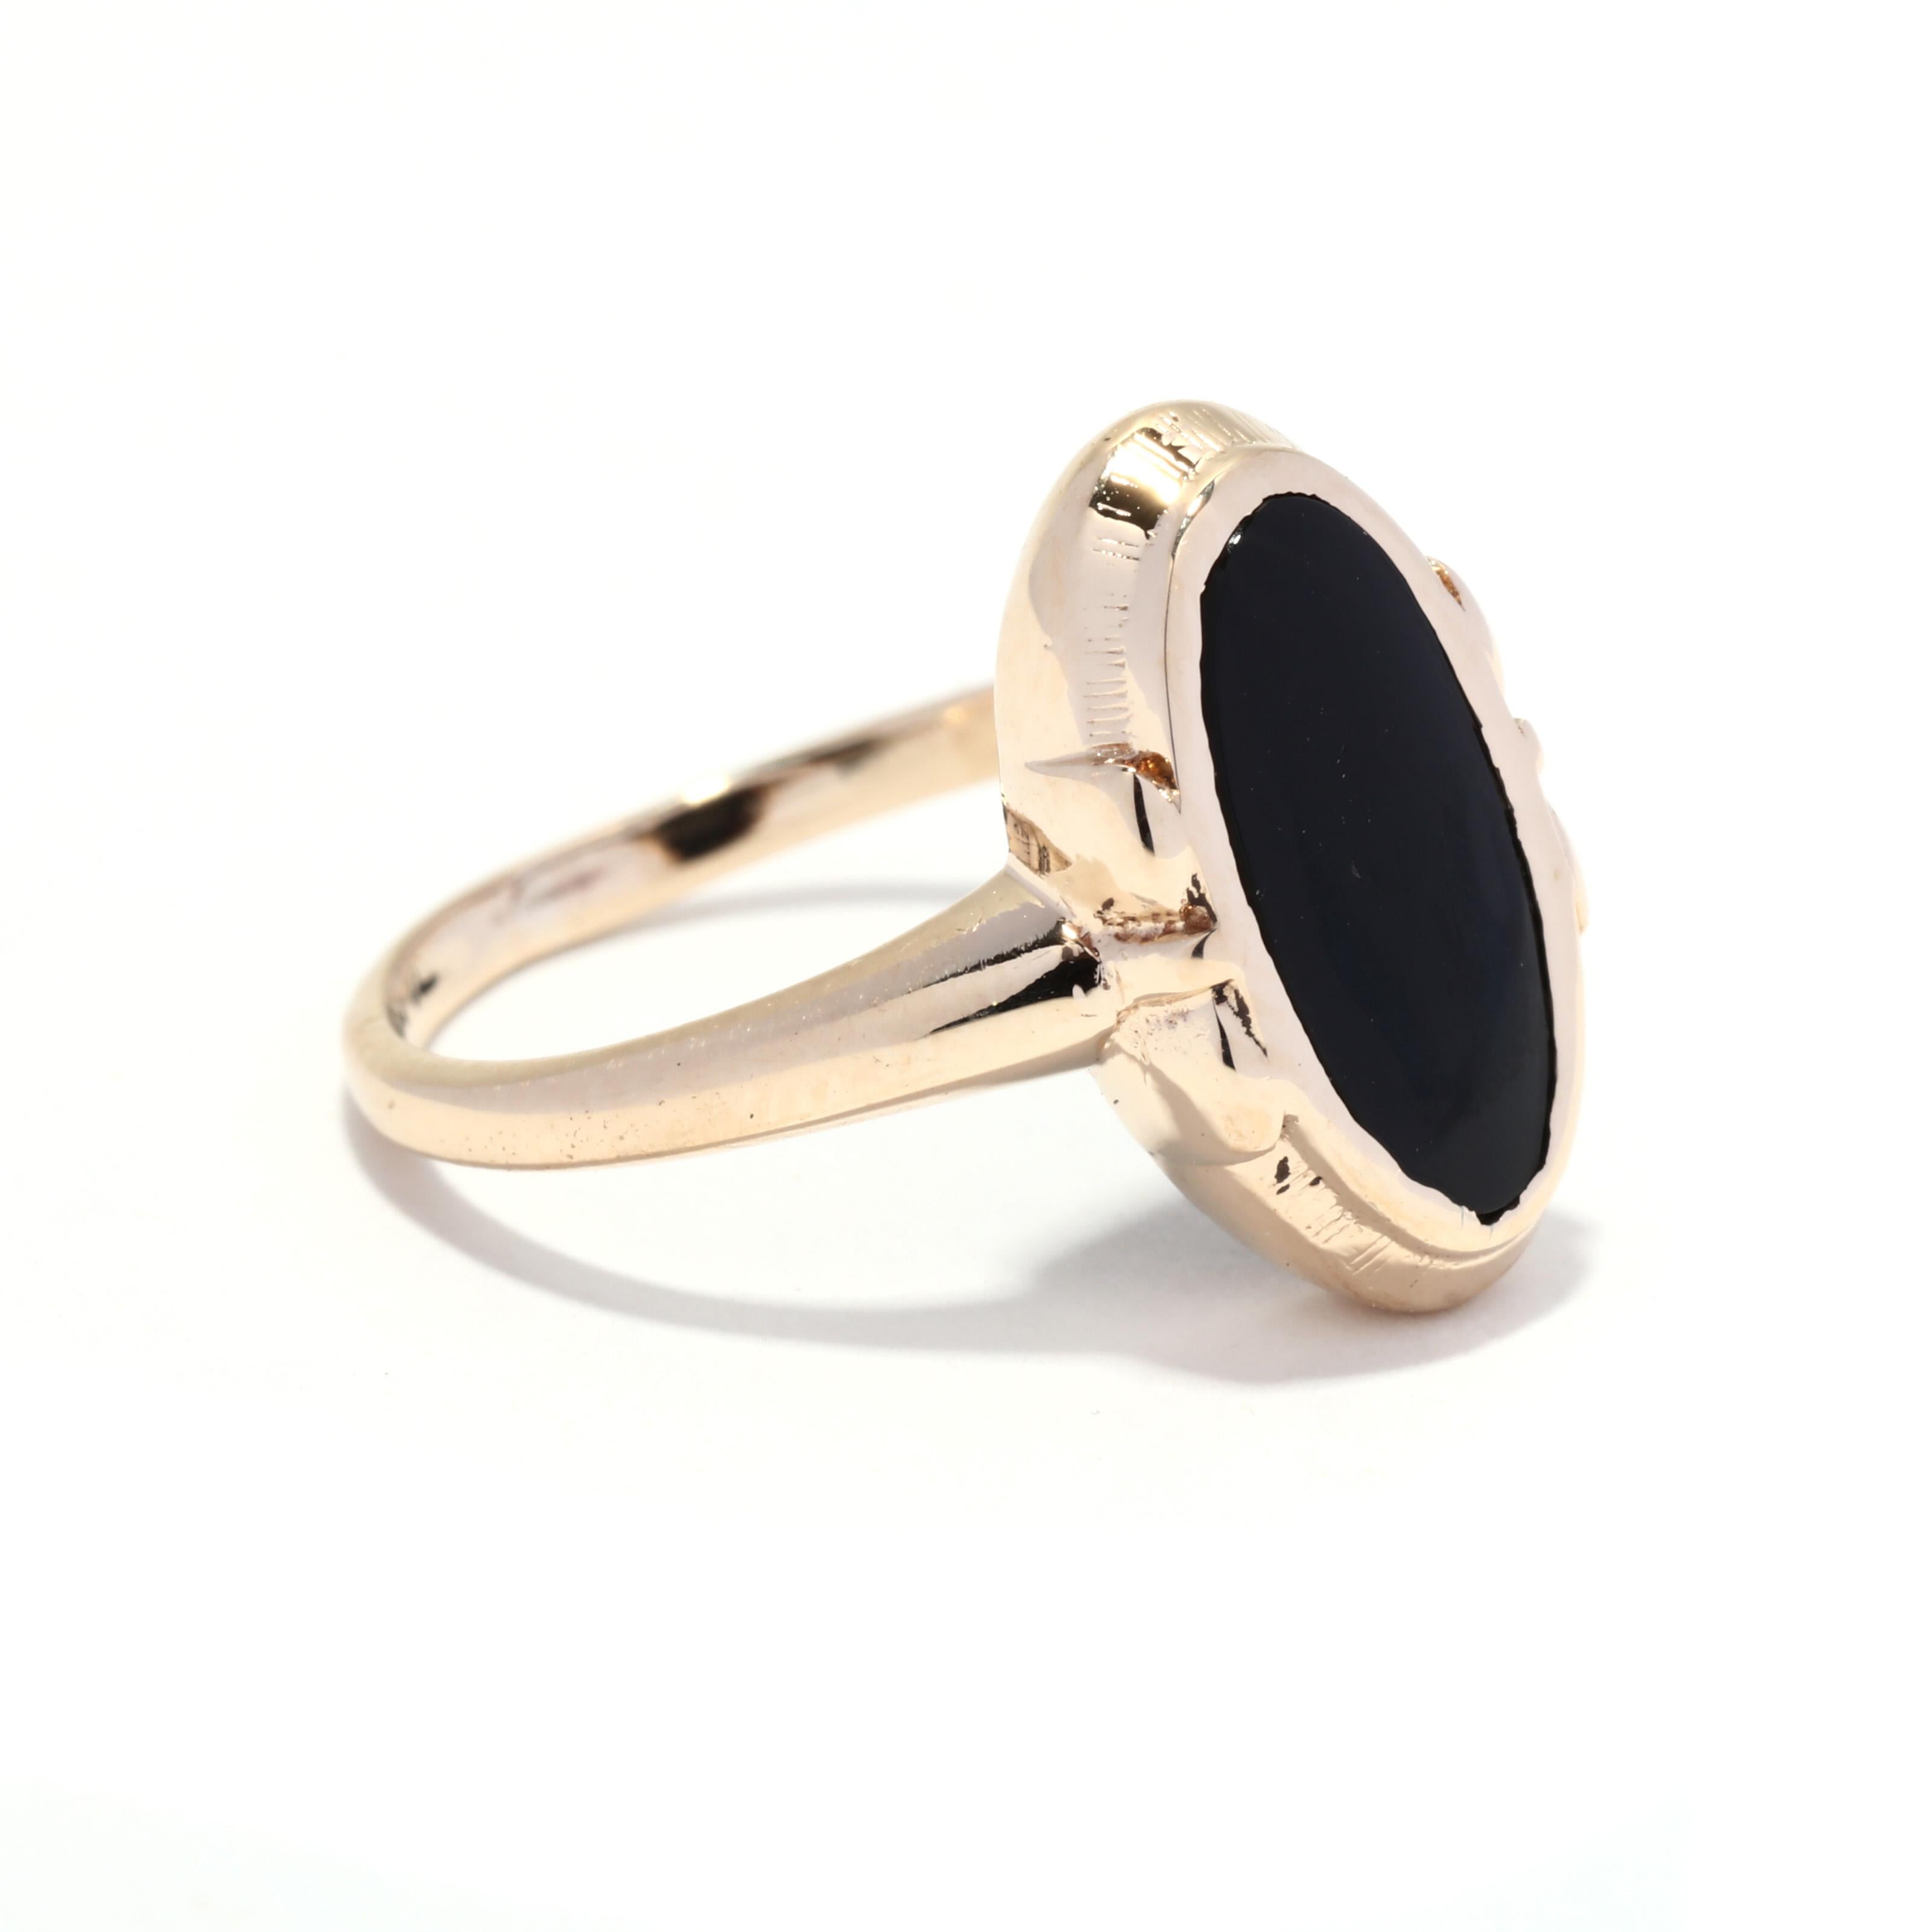 A vintage 10 karat yellow gold black onyx ring. This ring features a bezel set, oblong oval black onyx tablet stone with a bow motif detailing on either side and a thin band.

Stones:
- black onyx, 1 stone
- oval tablet
- 11.5 x5.75 mm

Ring Size